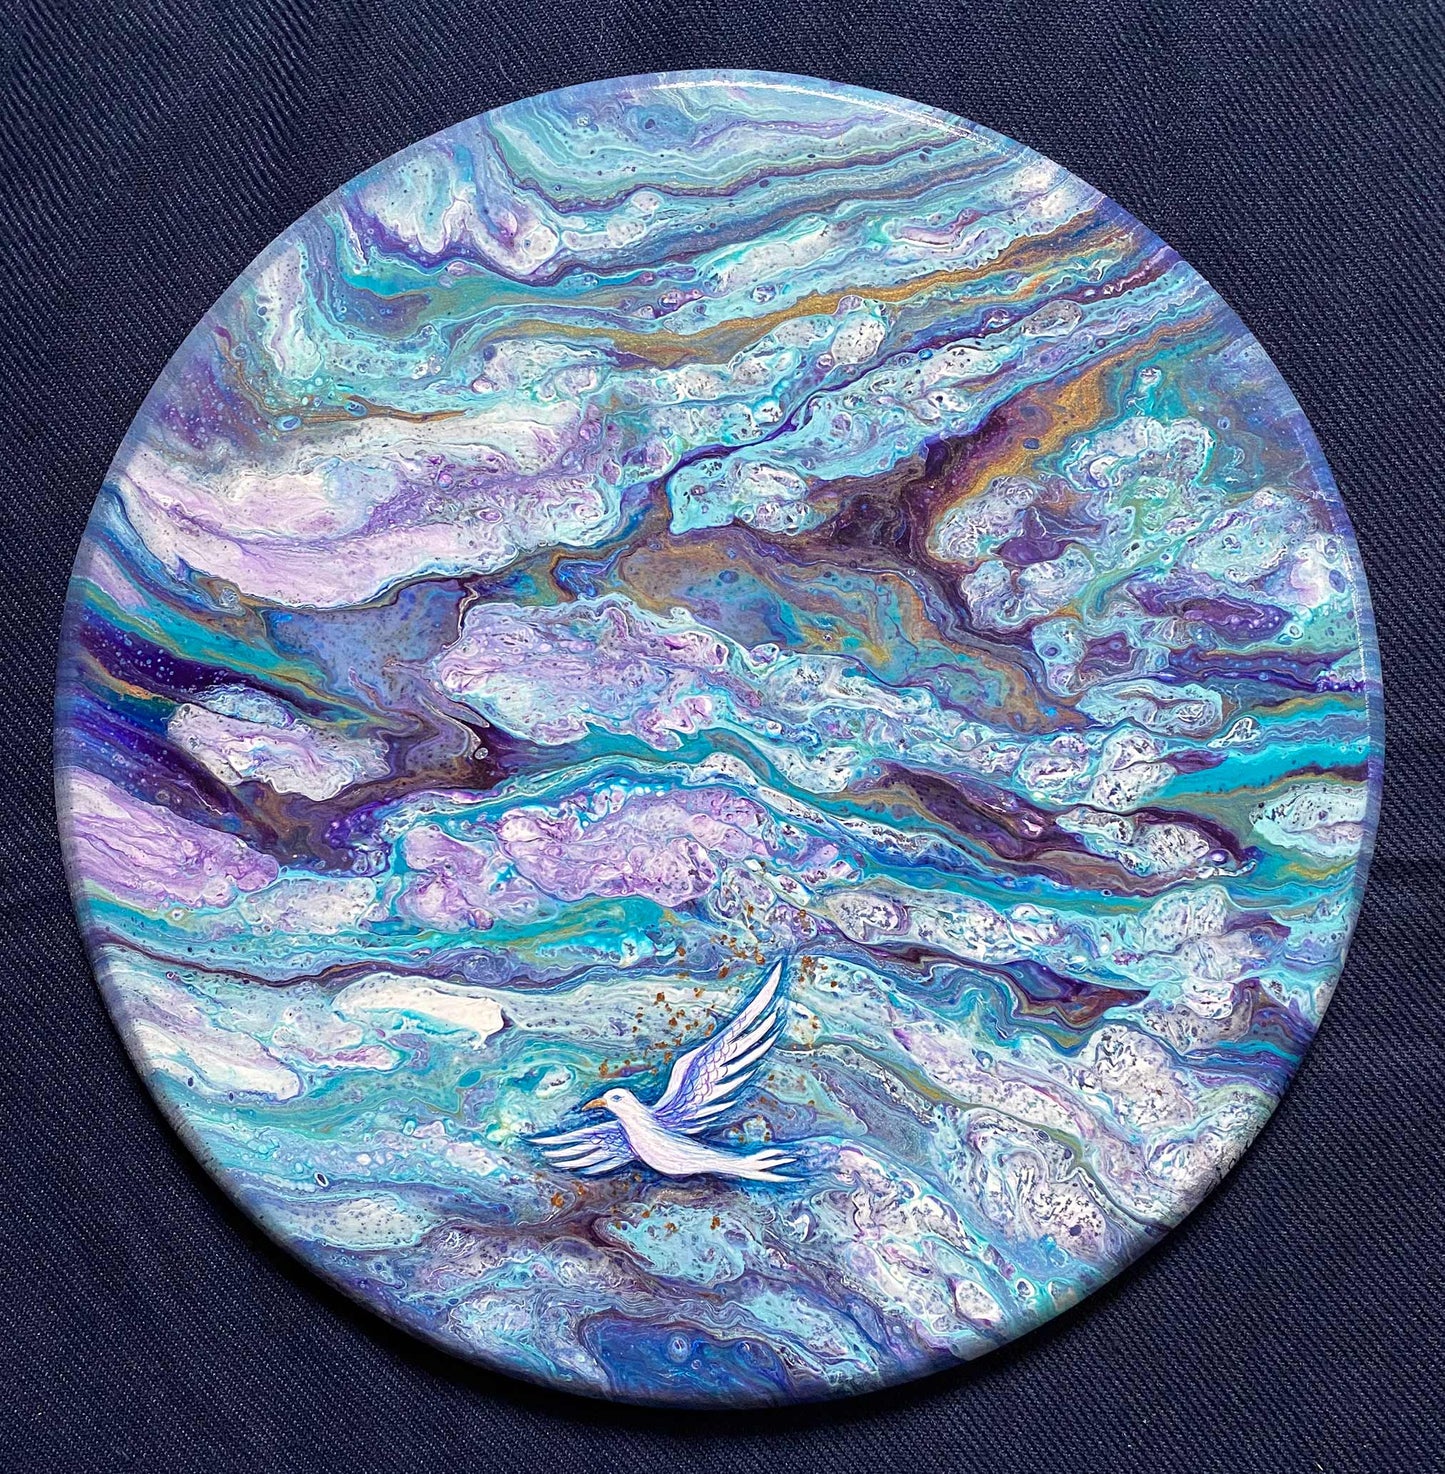 Tempest #8 - acrylic pour by Siona Benjamin